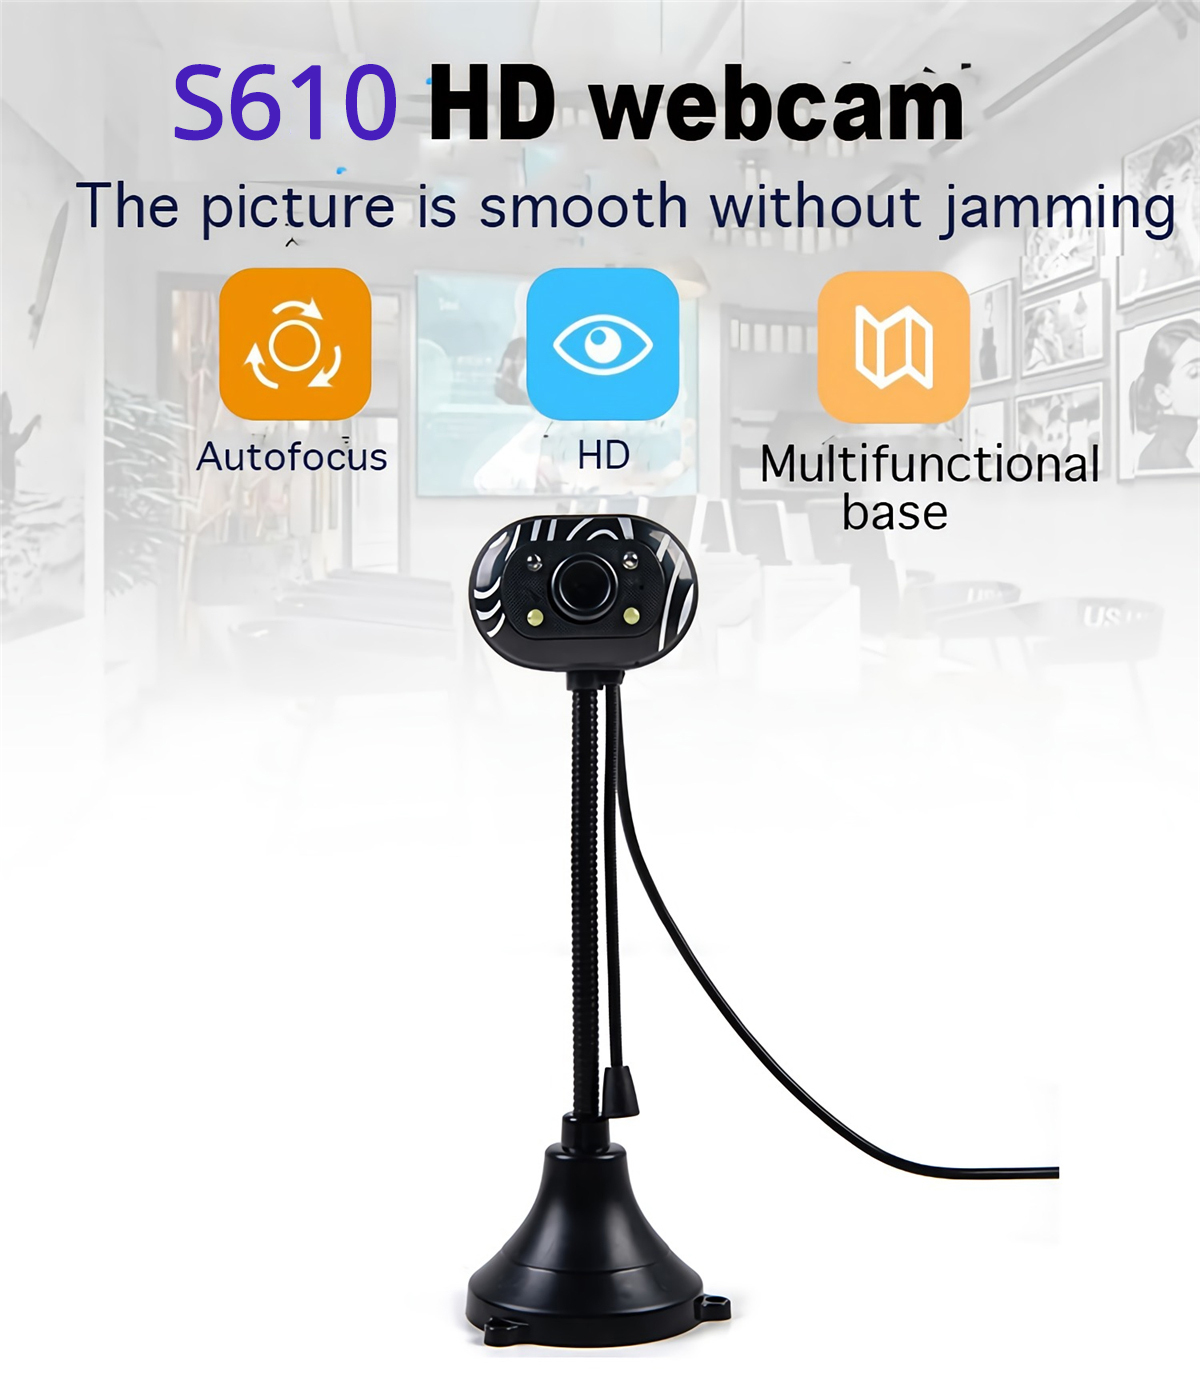 480P HD Webcam CMOS USB 2.0 Wired Computer Web Camera Built-in Microphone Camera for Desktop Computer Notebook PC